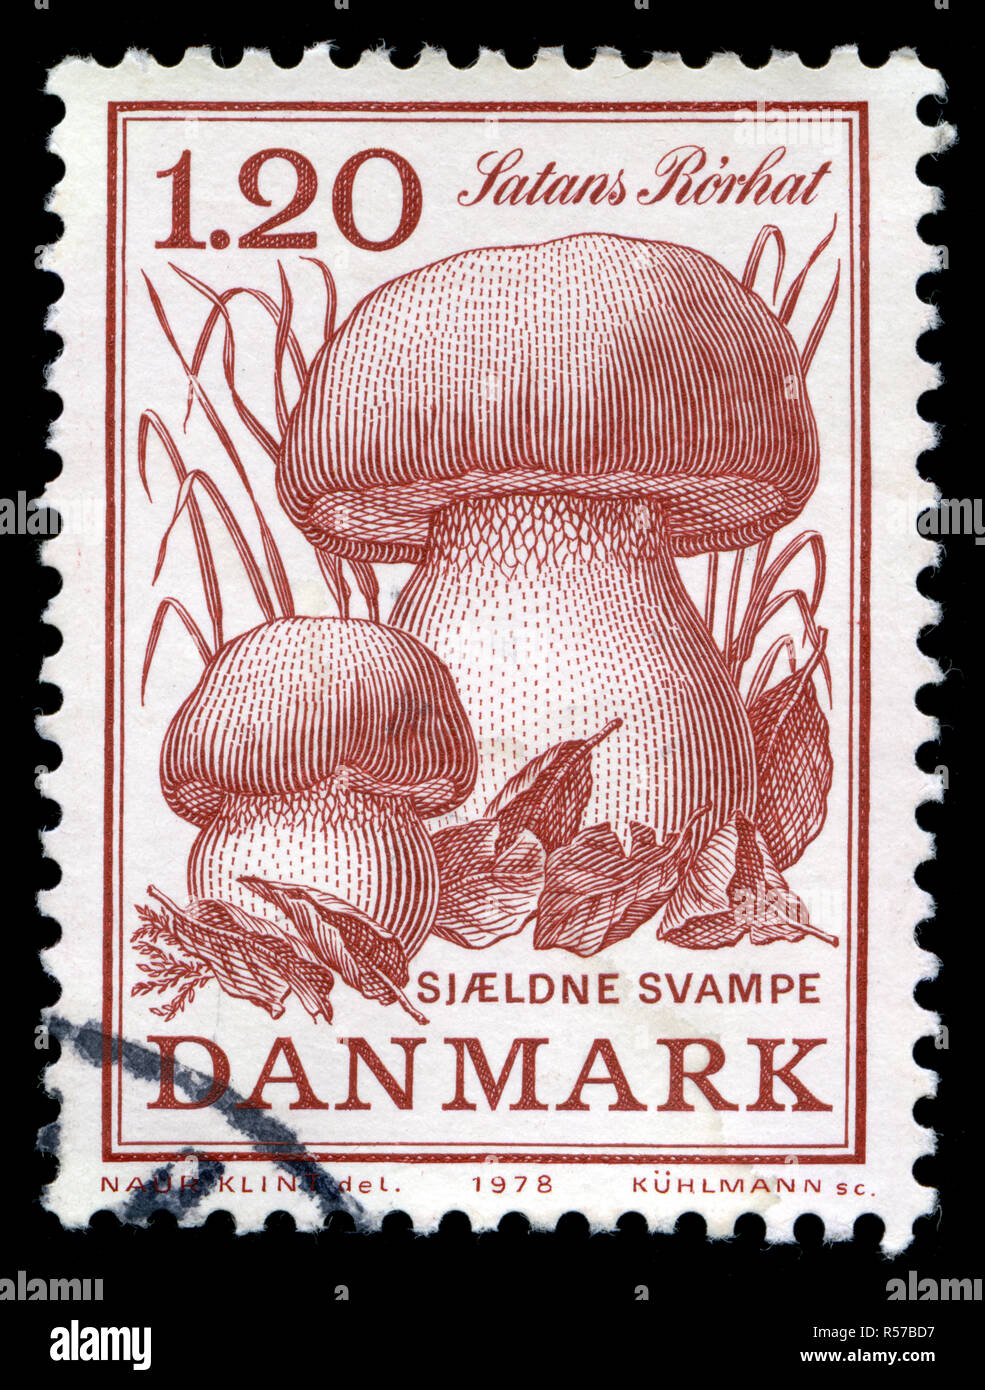 Postage stamp from Denmark in the Mushrooms series issued in 1978 Stock Photo